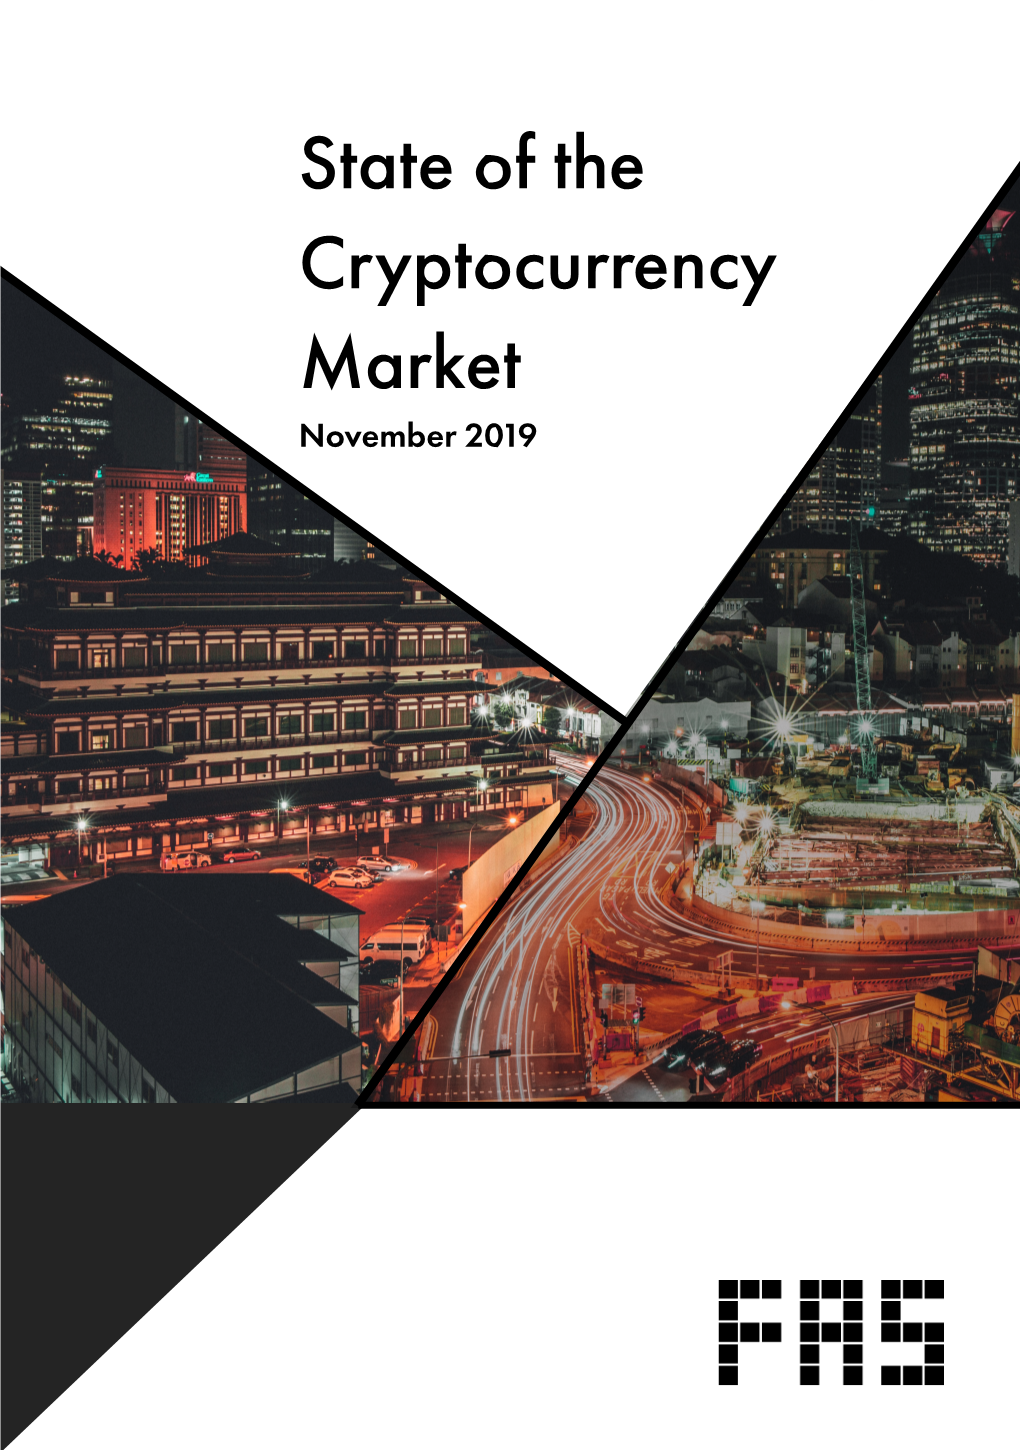 State of the Cryptocurrency Market November 2019 Contents